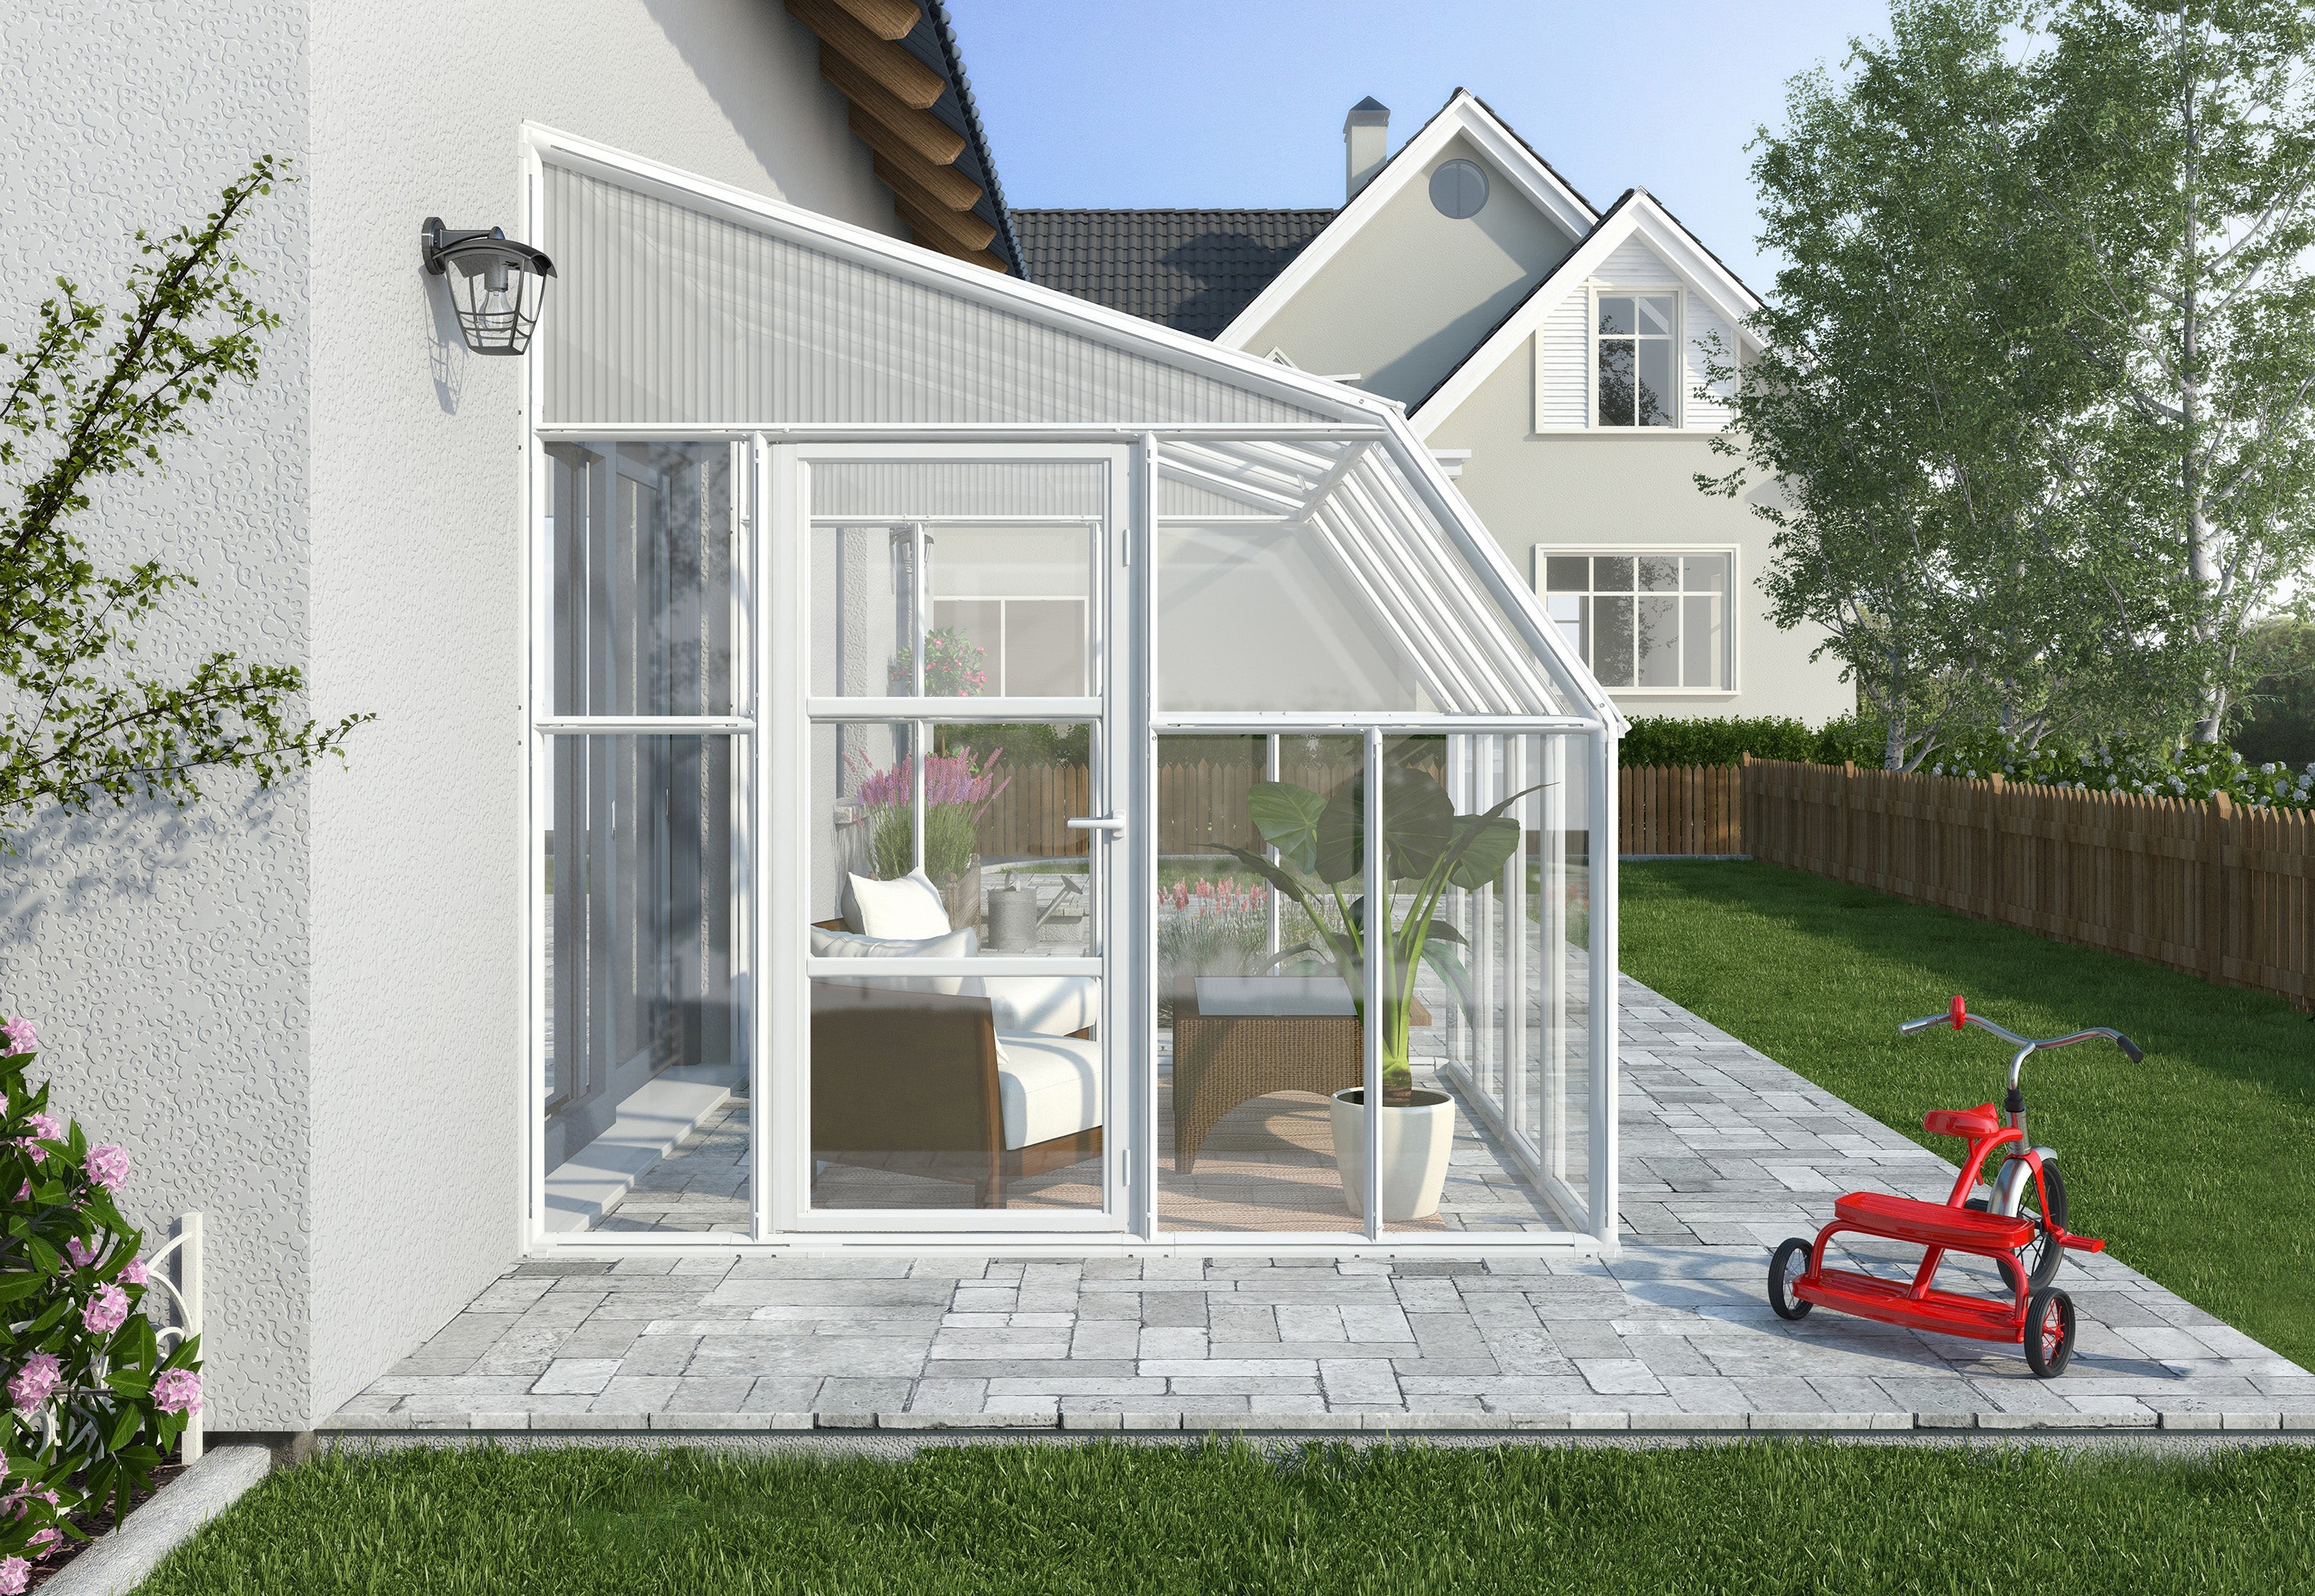 Sun Room 2™ Clear Wall 8x8x12.ft Lean-to Greenhouse - Dive To Garden